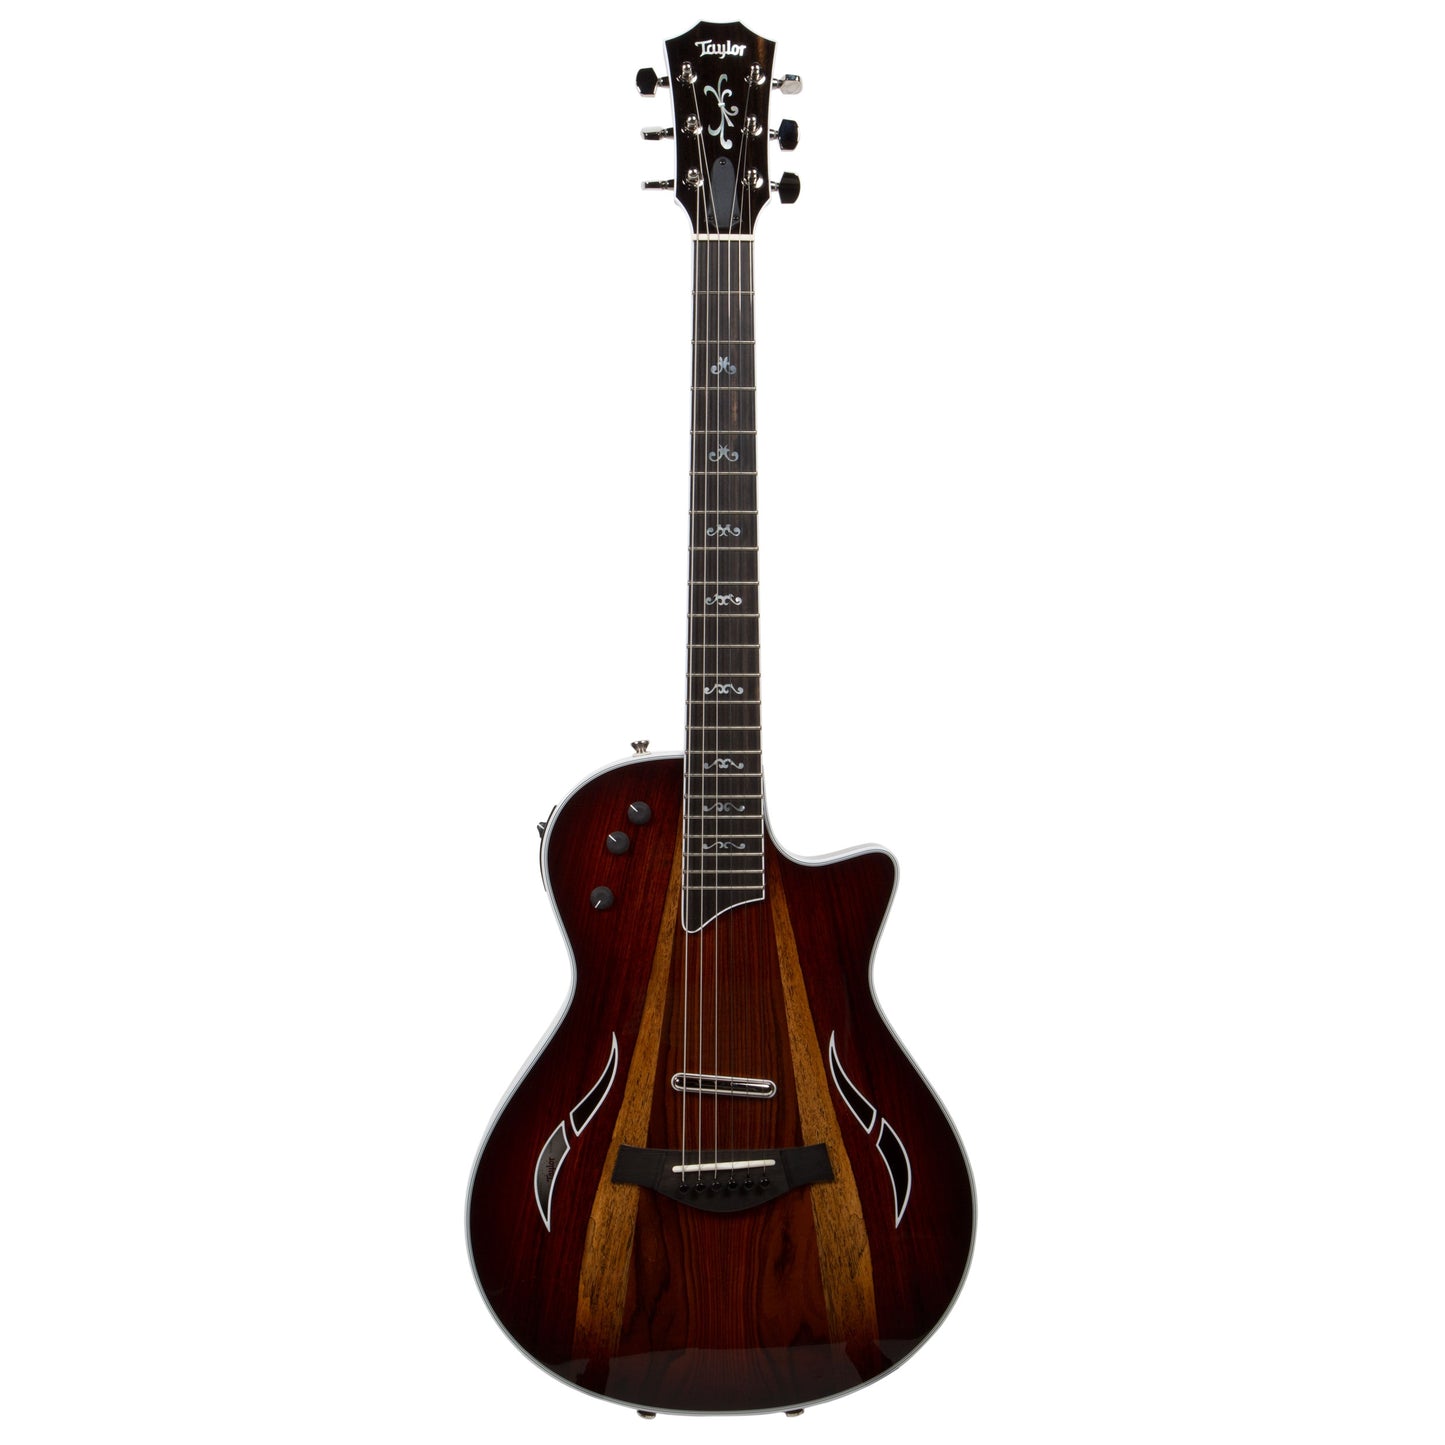 Taylor T5Z Custom Thinline Hybrid Acoustic Electric Guitar with Cocobolo Top (T5ZCUSTOMCRP110959133)